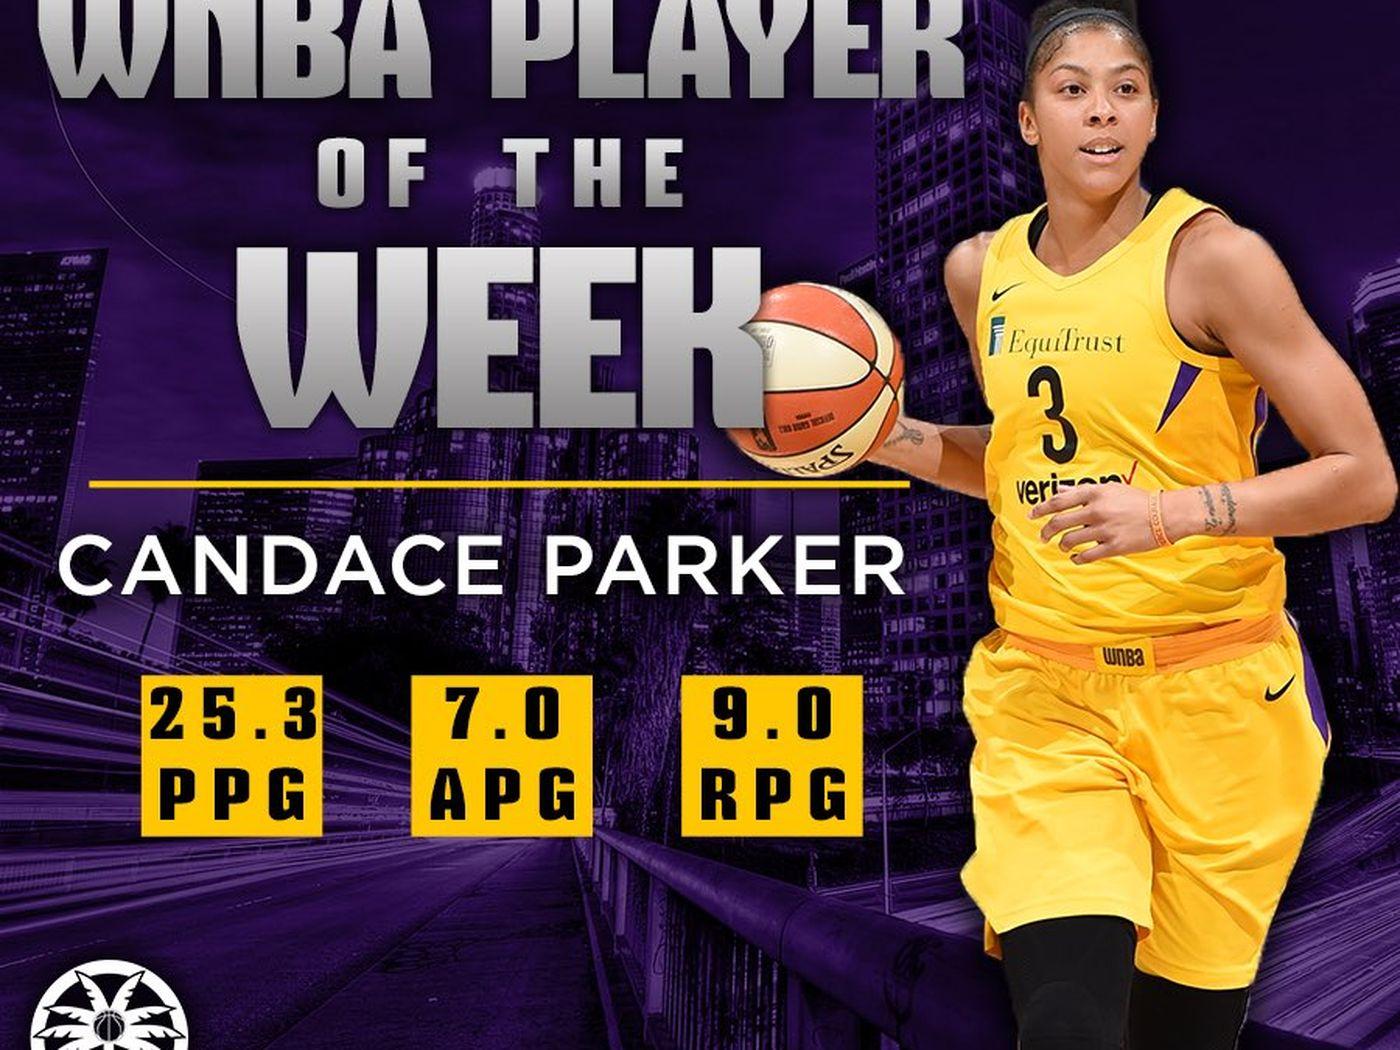 Player of the Week Candace Parker is on a joy ride.